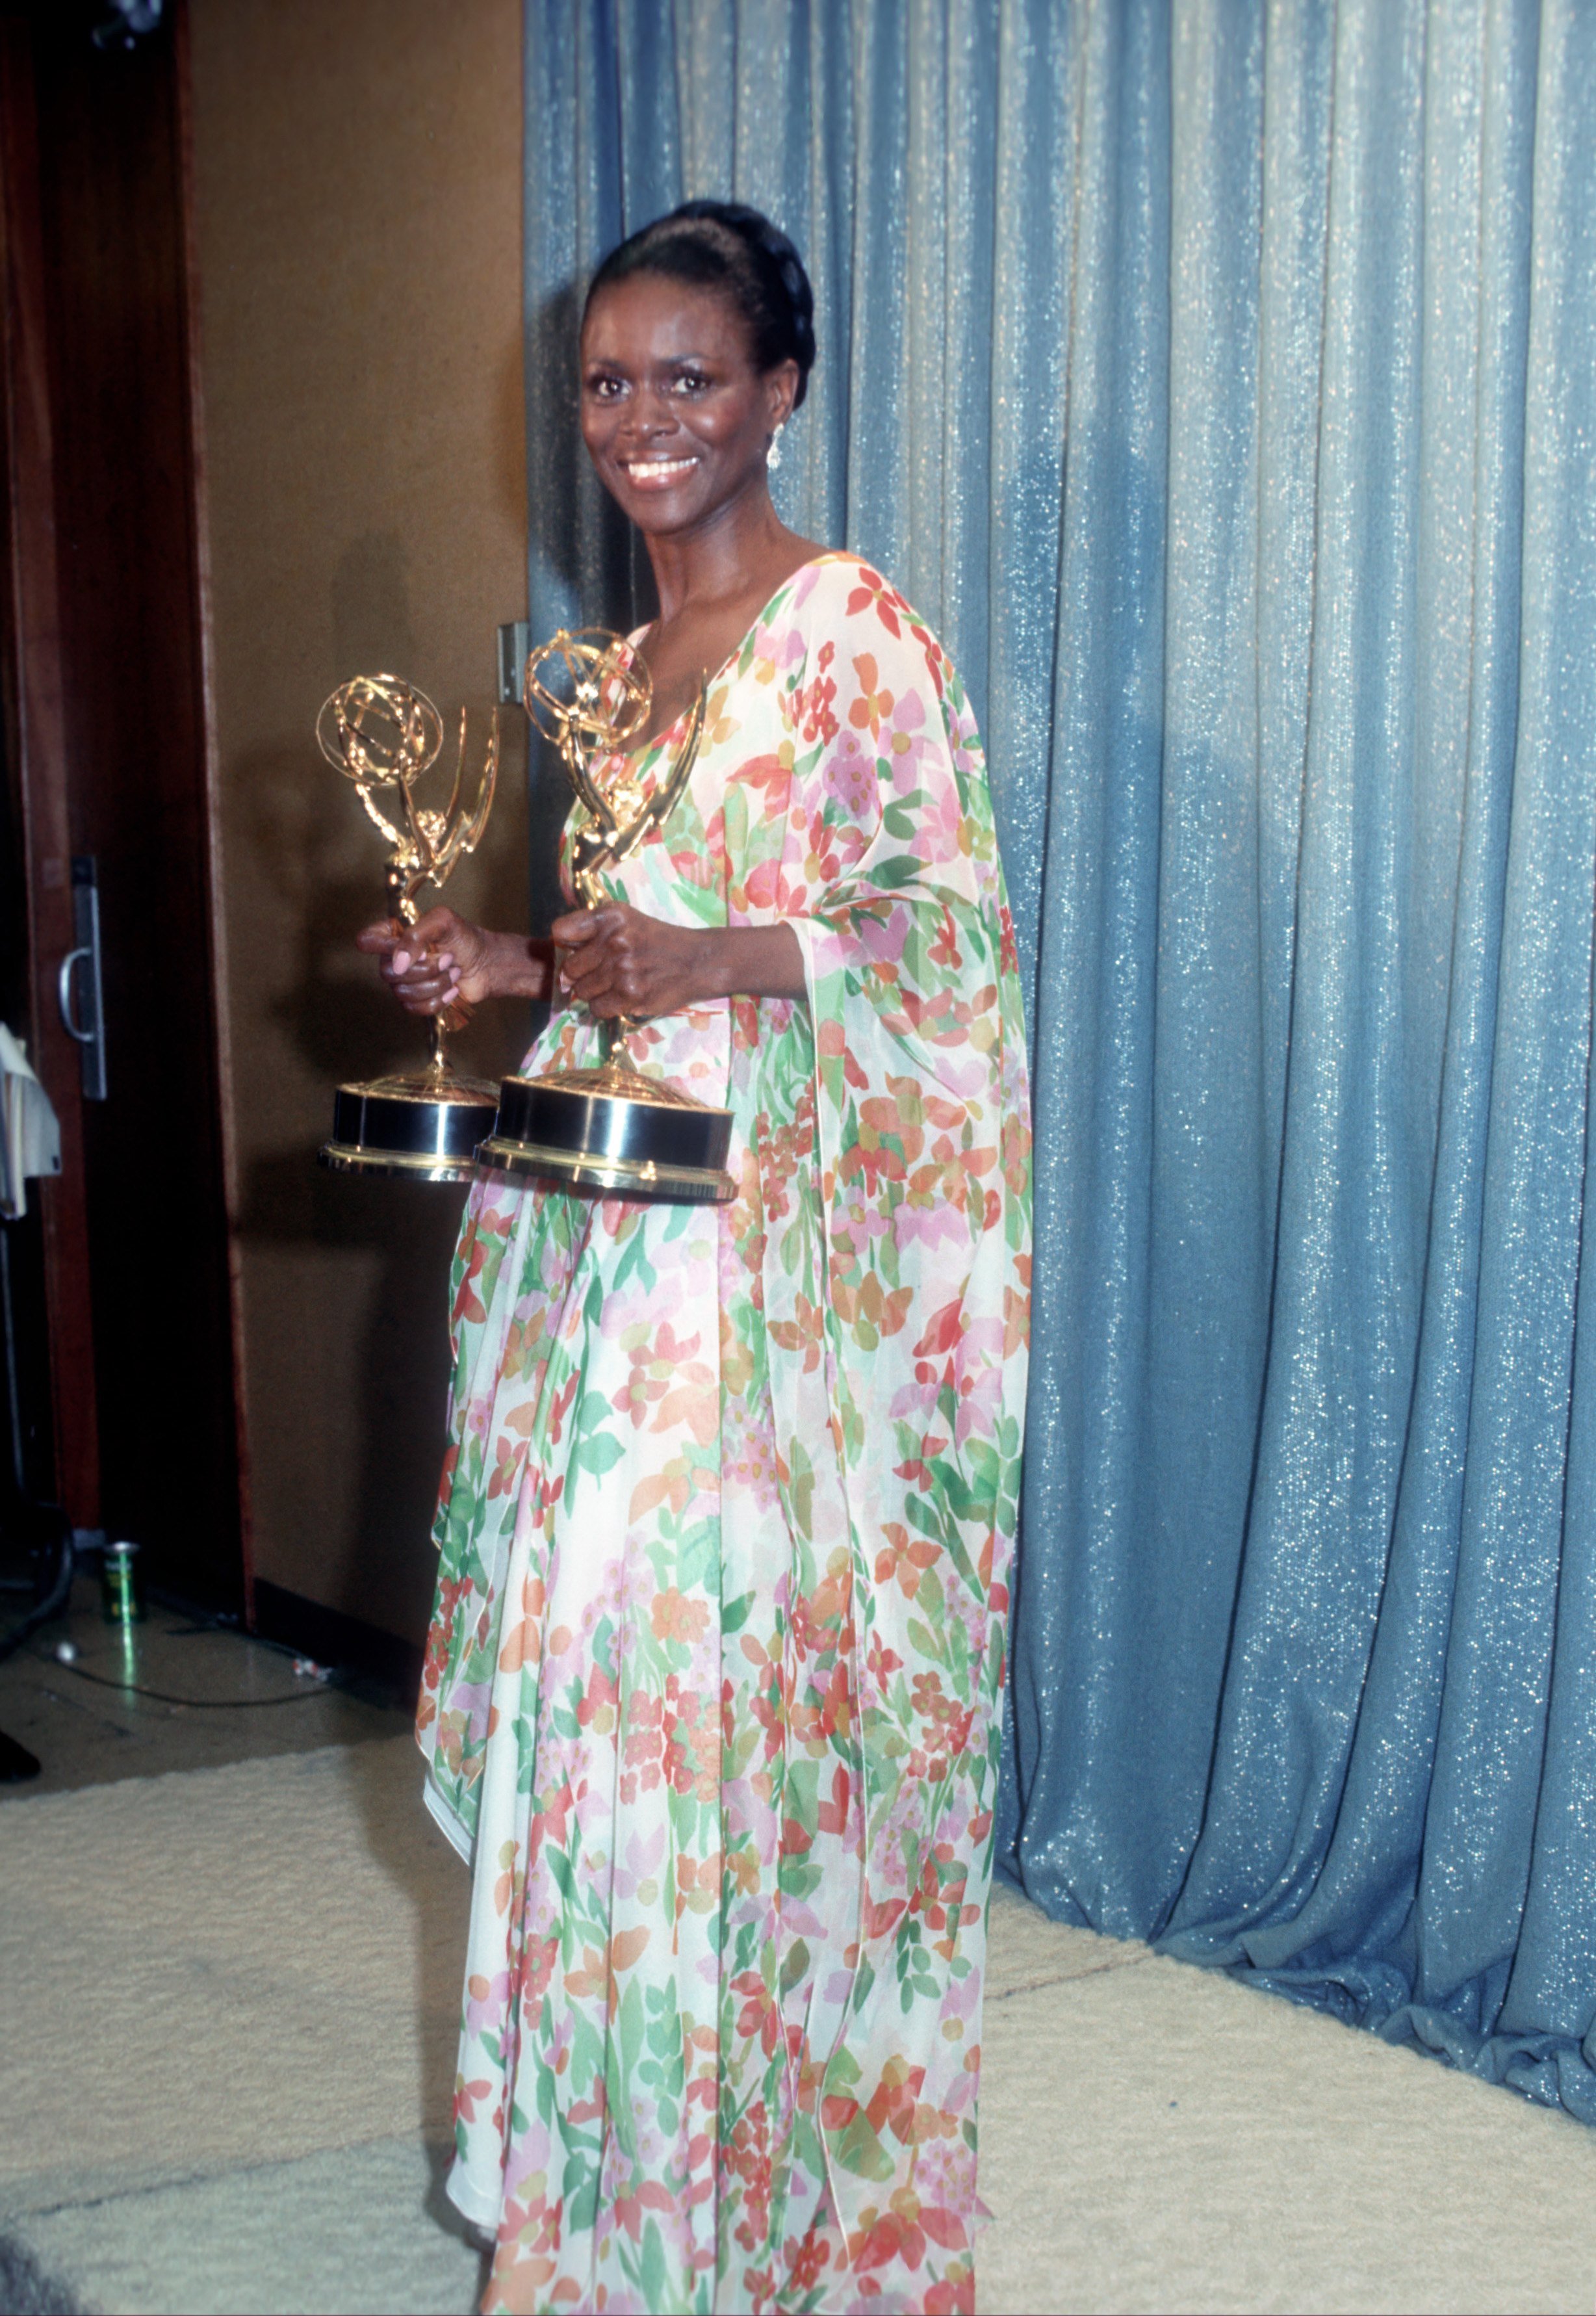 Cicely Tyson holds the two Emmy Awards she won for her performance in "The Autobiography Of Miss Jane Pittman" on May 28, 1974 in Los Angeles, California.|Source: Getty Images